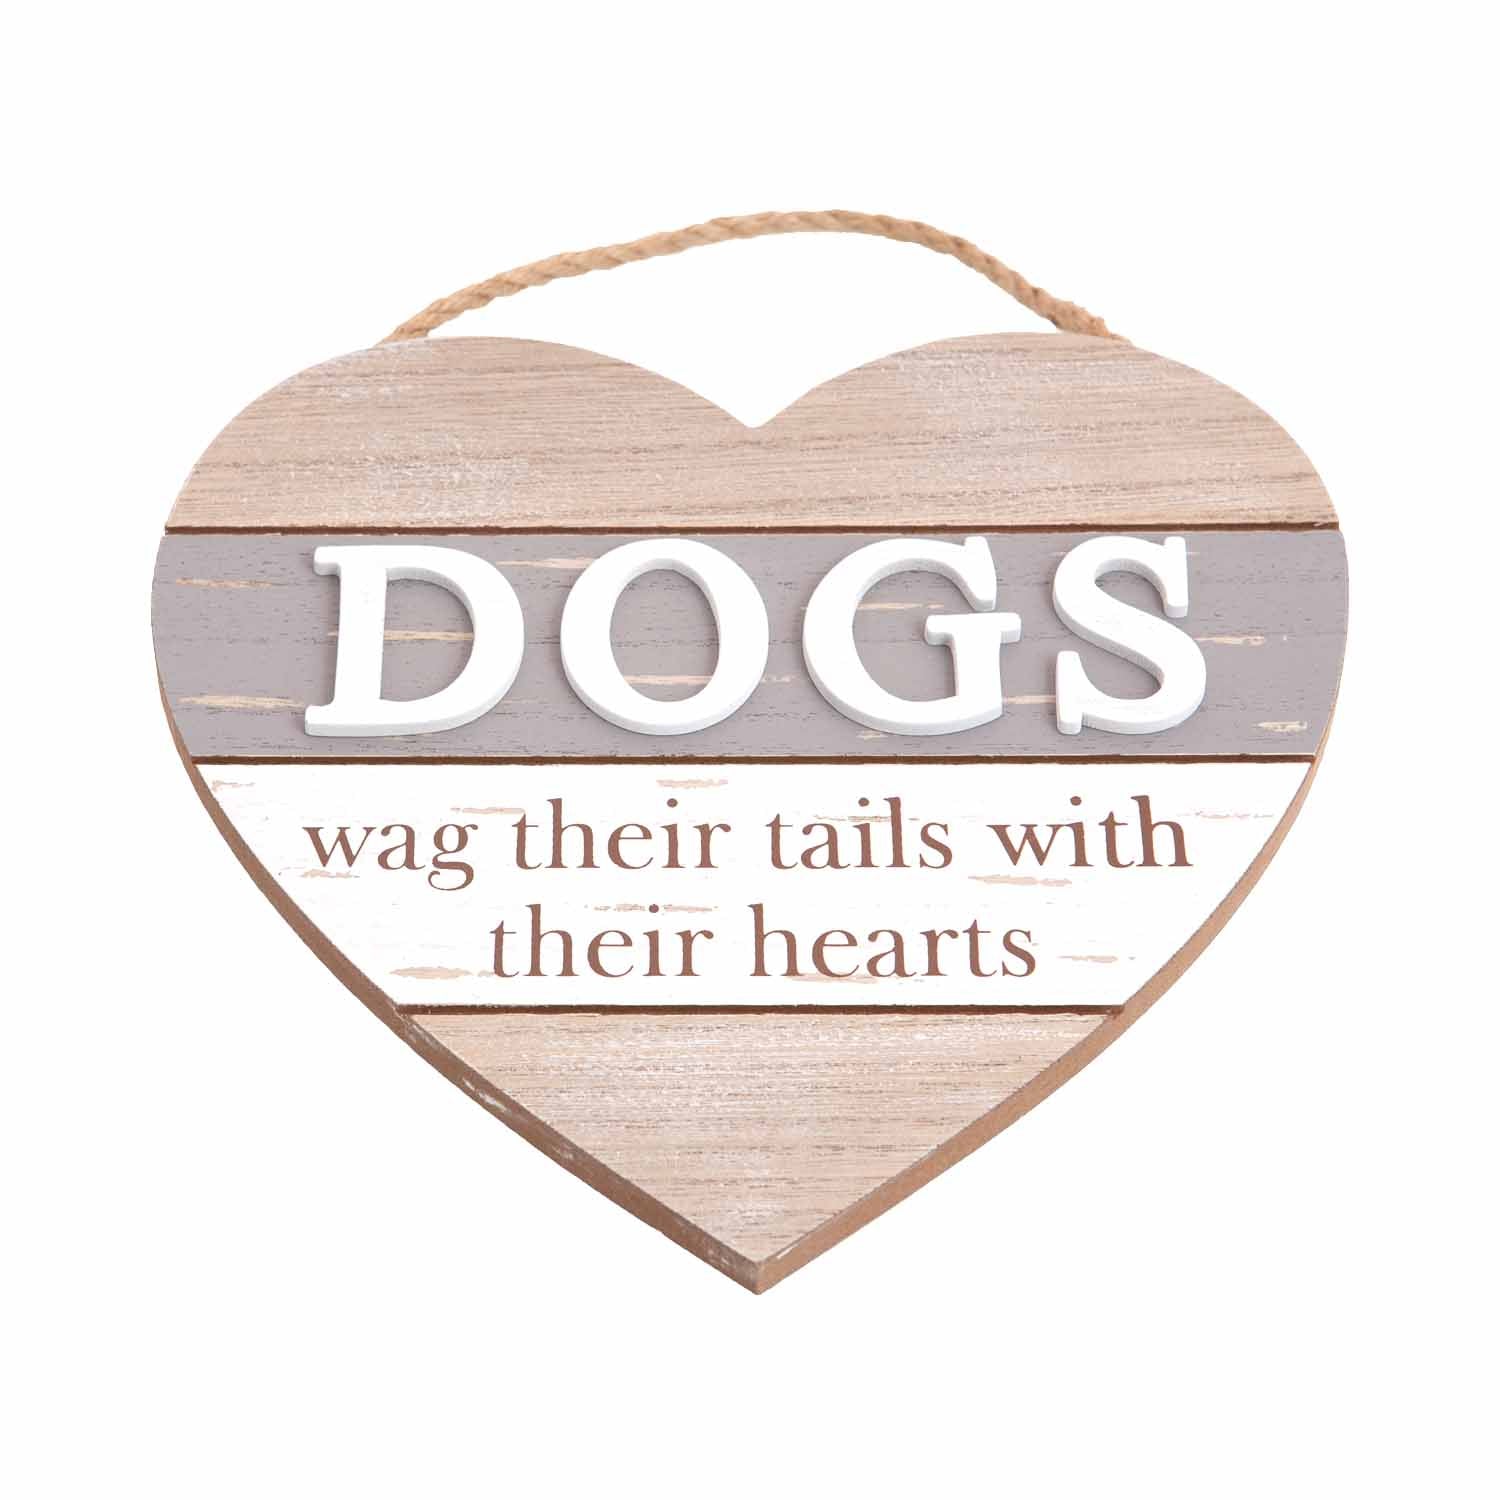 Dog Lover Gifts available at Dog Krazy Gifts – Dogs Wag Their Tails With Their Hearts Boardwalk Sign, Just Part Of Our Collection Of Signs Available At www.dogkrazygifts.co.uk